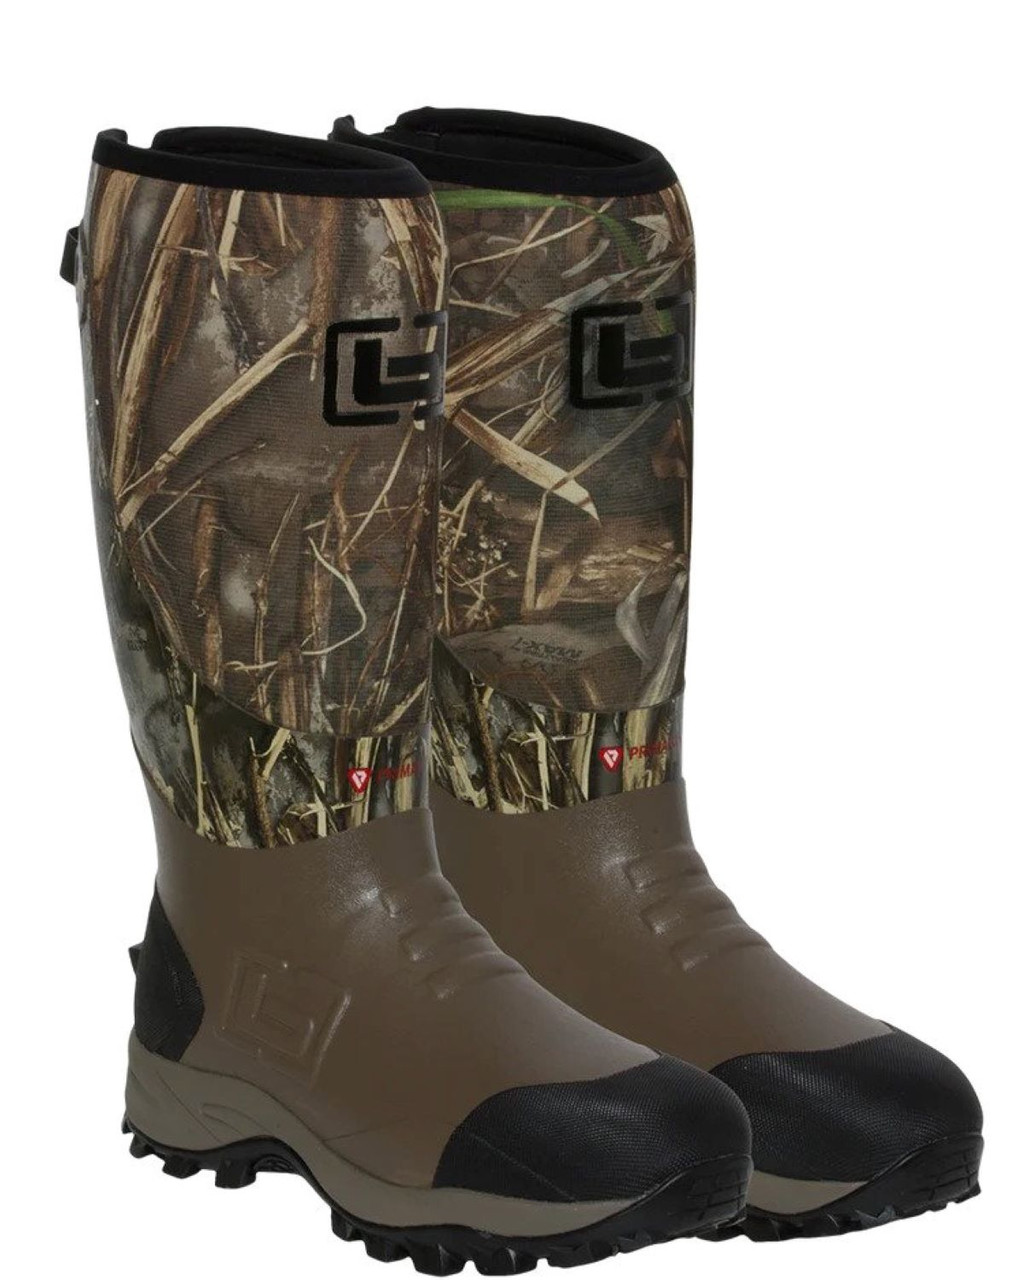 Banded Black Label Elite Series RZ Hybrid Neo-Rubber Boot - MAX7 - Size 10